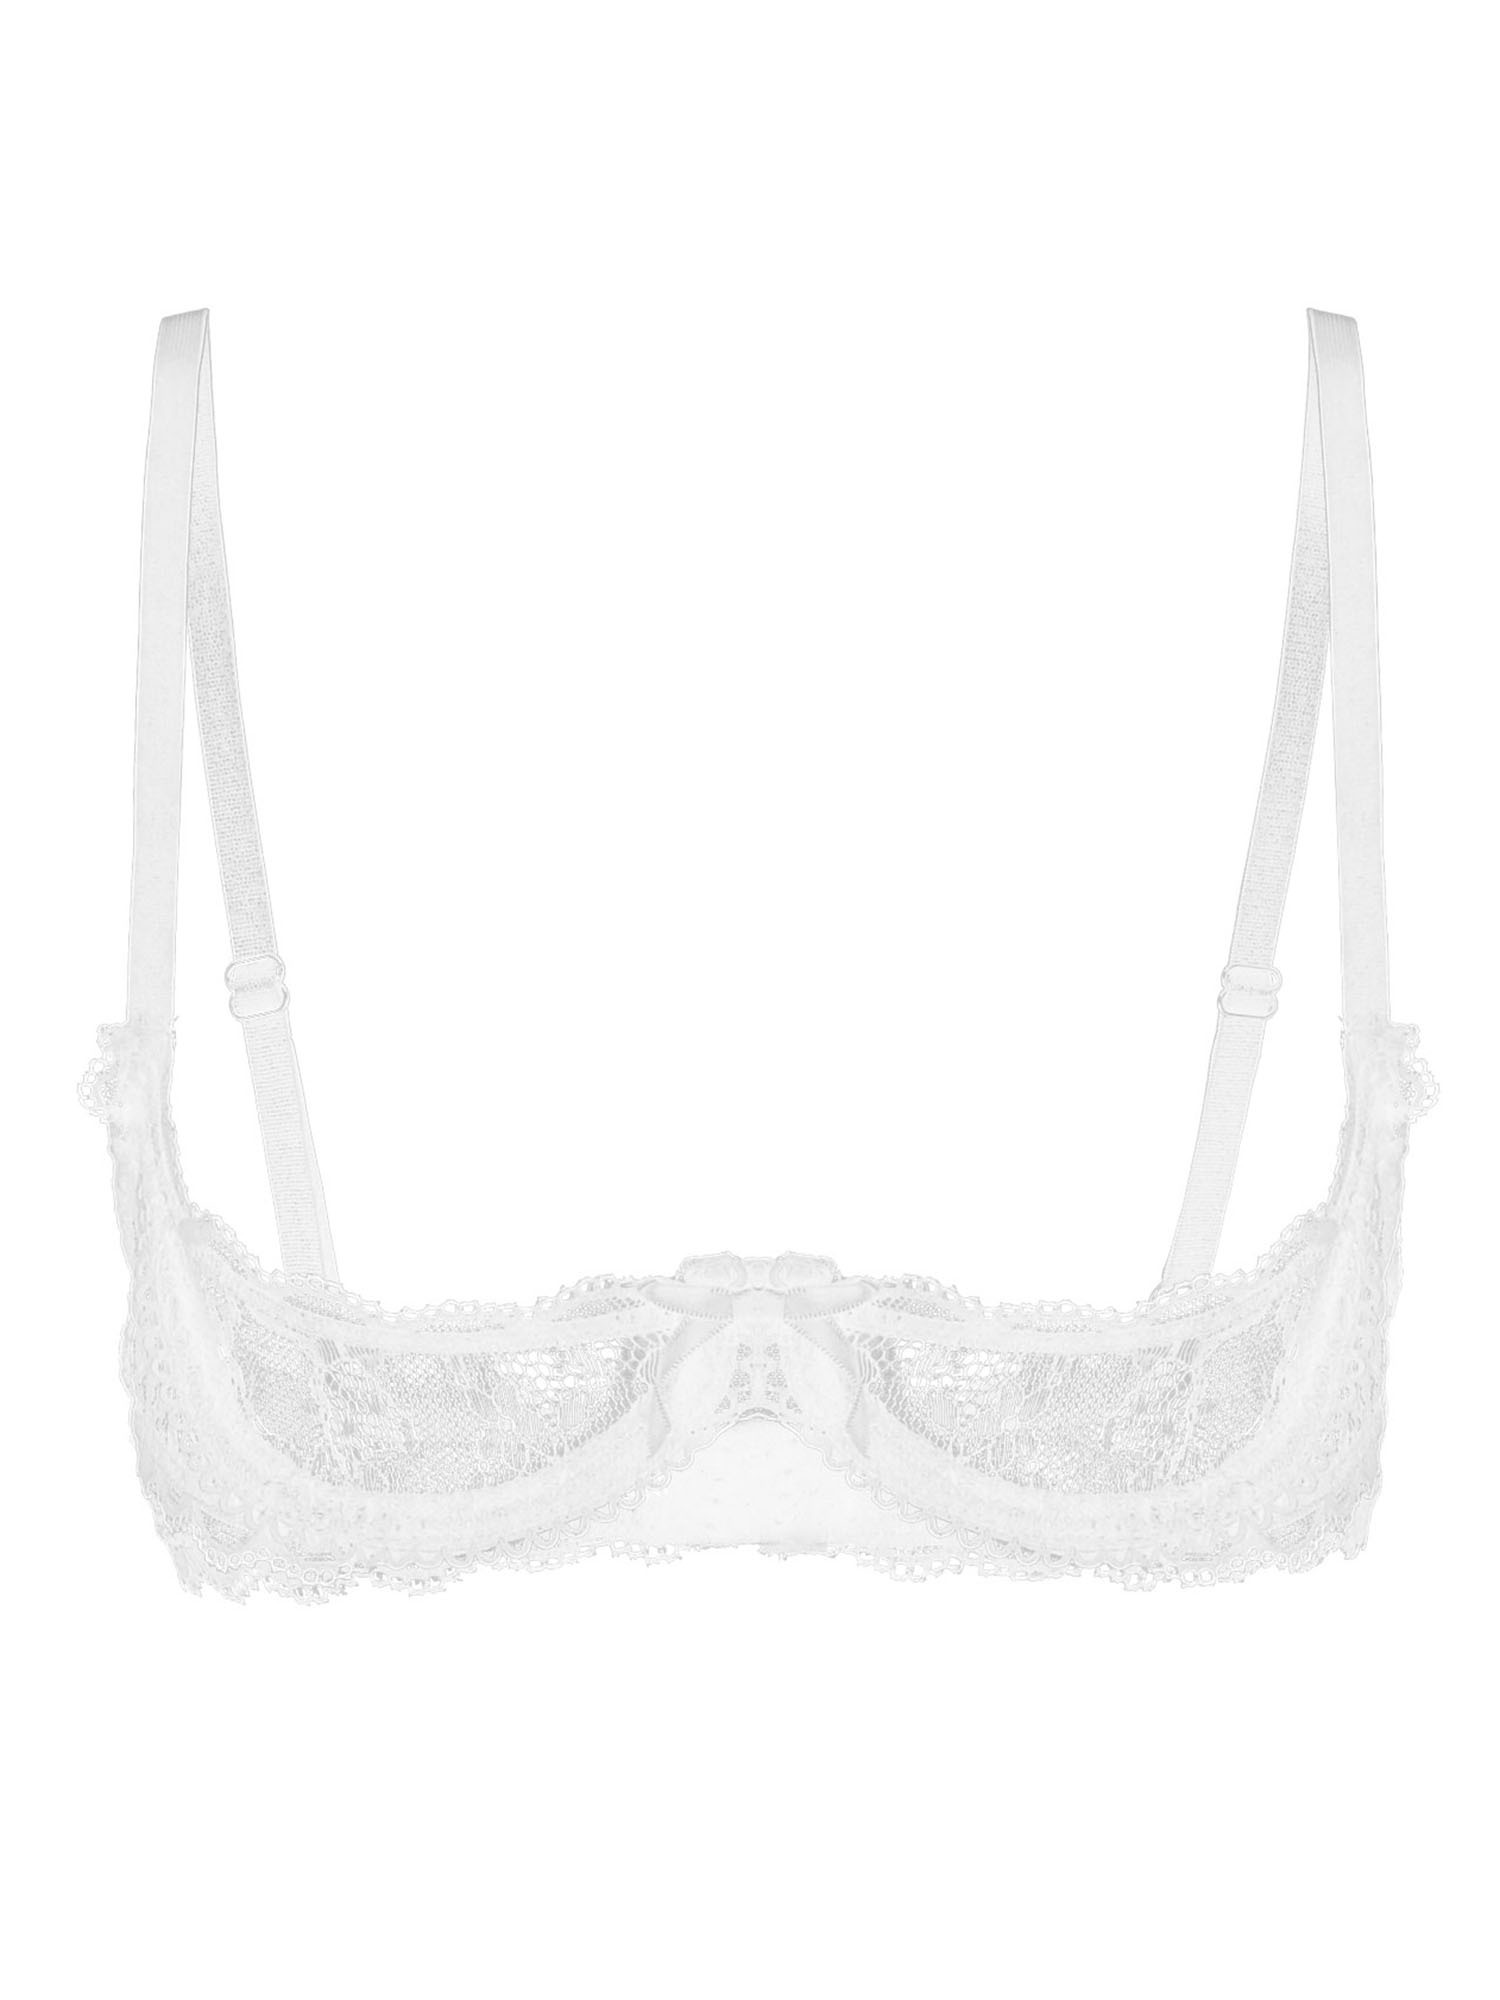 Aislor Women's Sheer Lace 1/4 Cup Underwired Shelf Bra Balconette ...